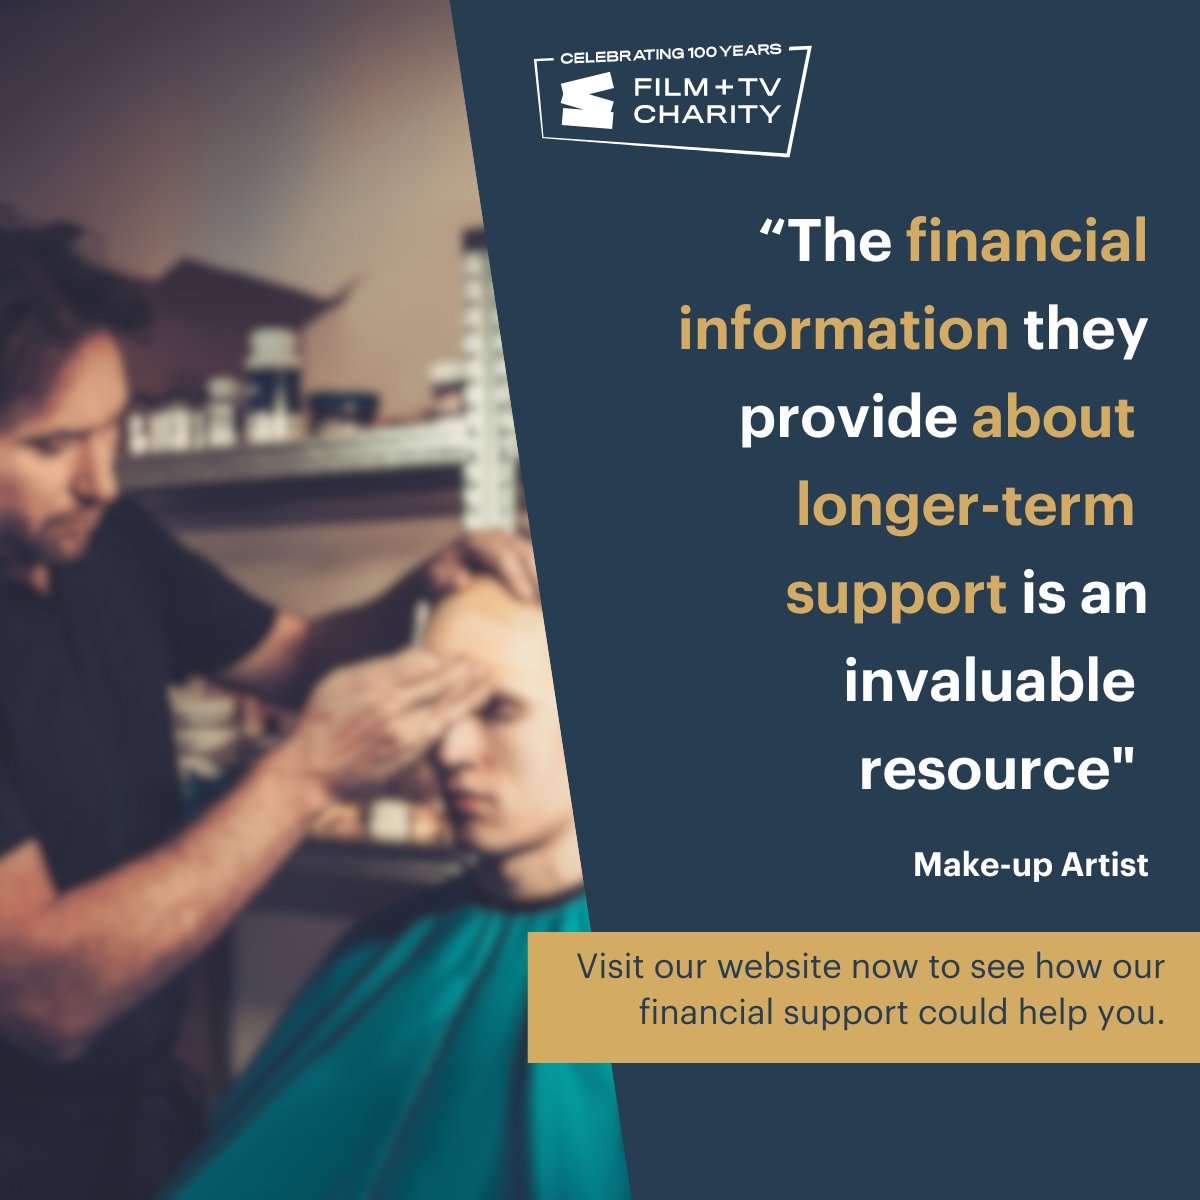 ✨From grants to guidance and tools, our financial support can help your finances in the long term. ✨ Visit our website today to see how we can help you! bit.ly/425JVO3